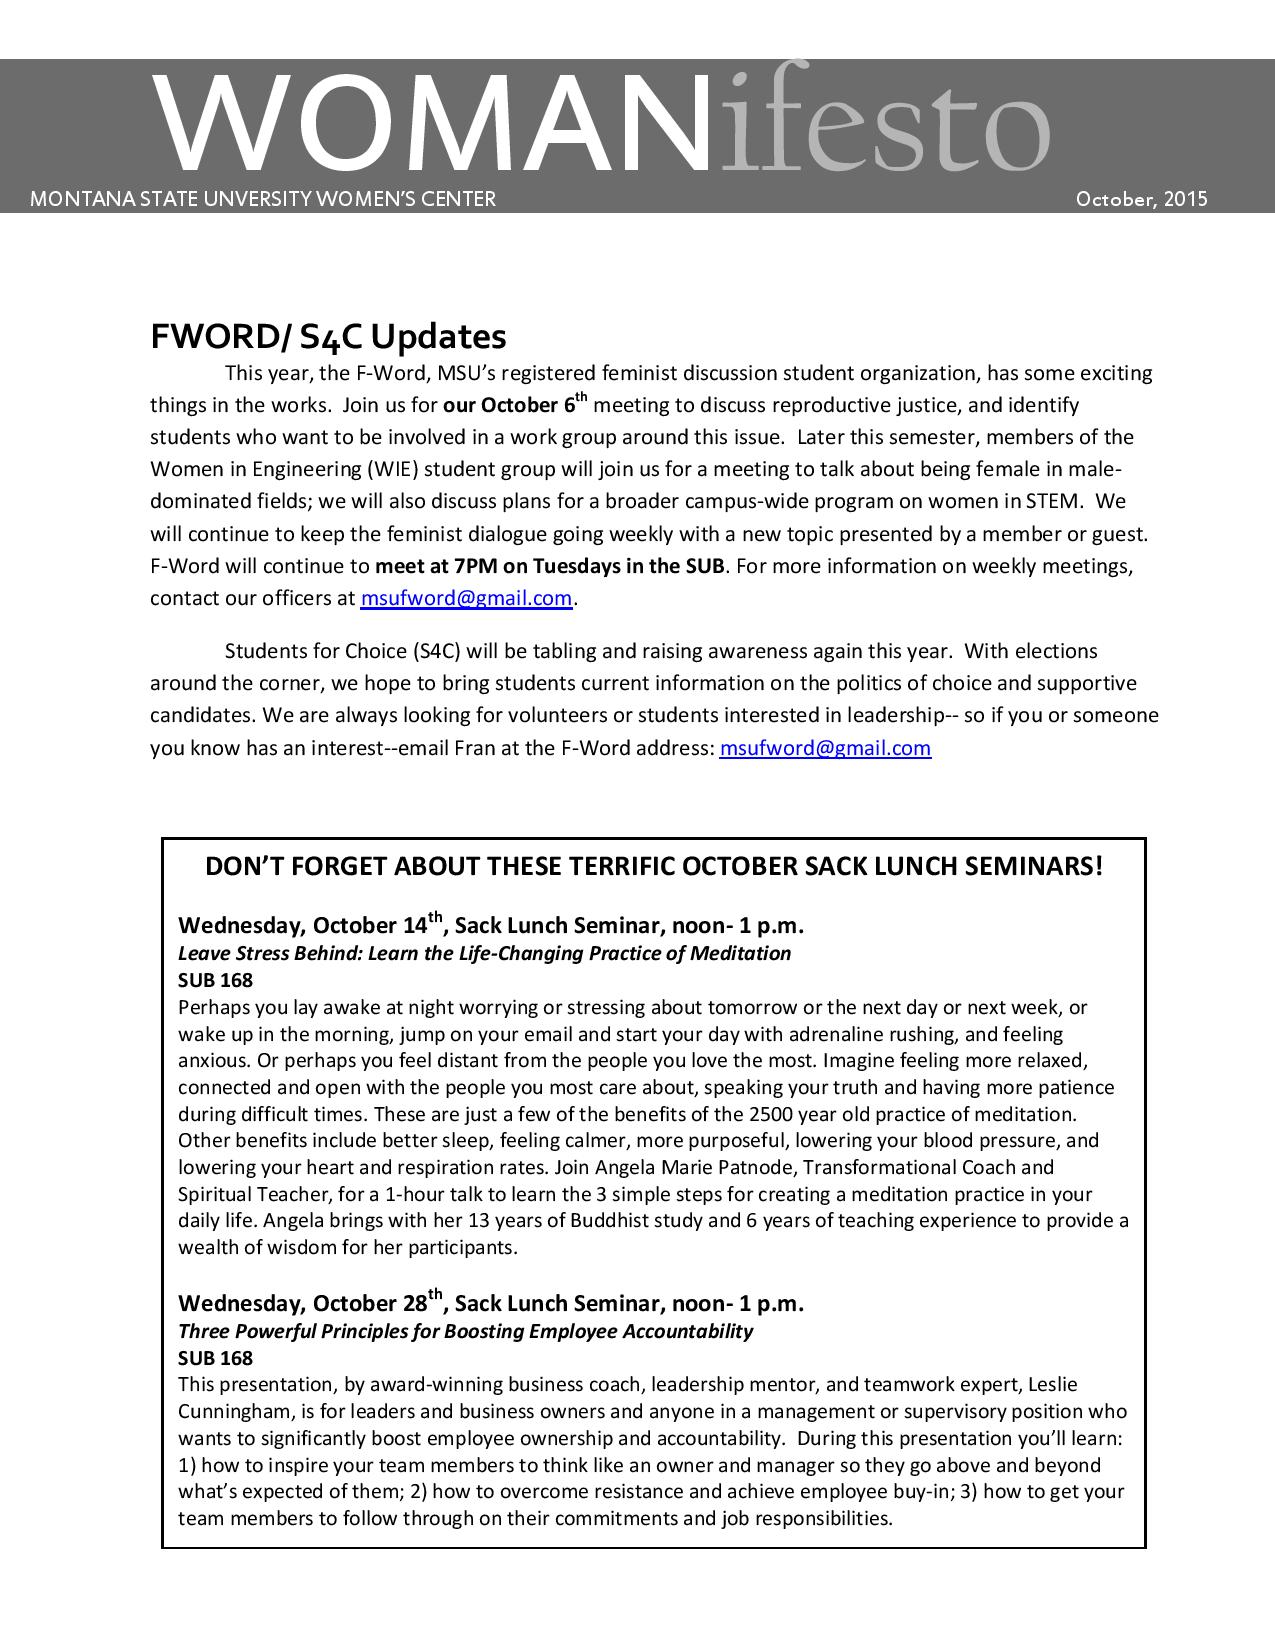 page 7 of newsletter. Contact women's center for word document copy.